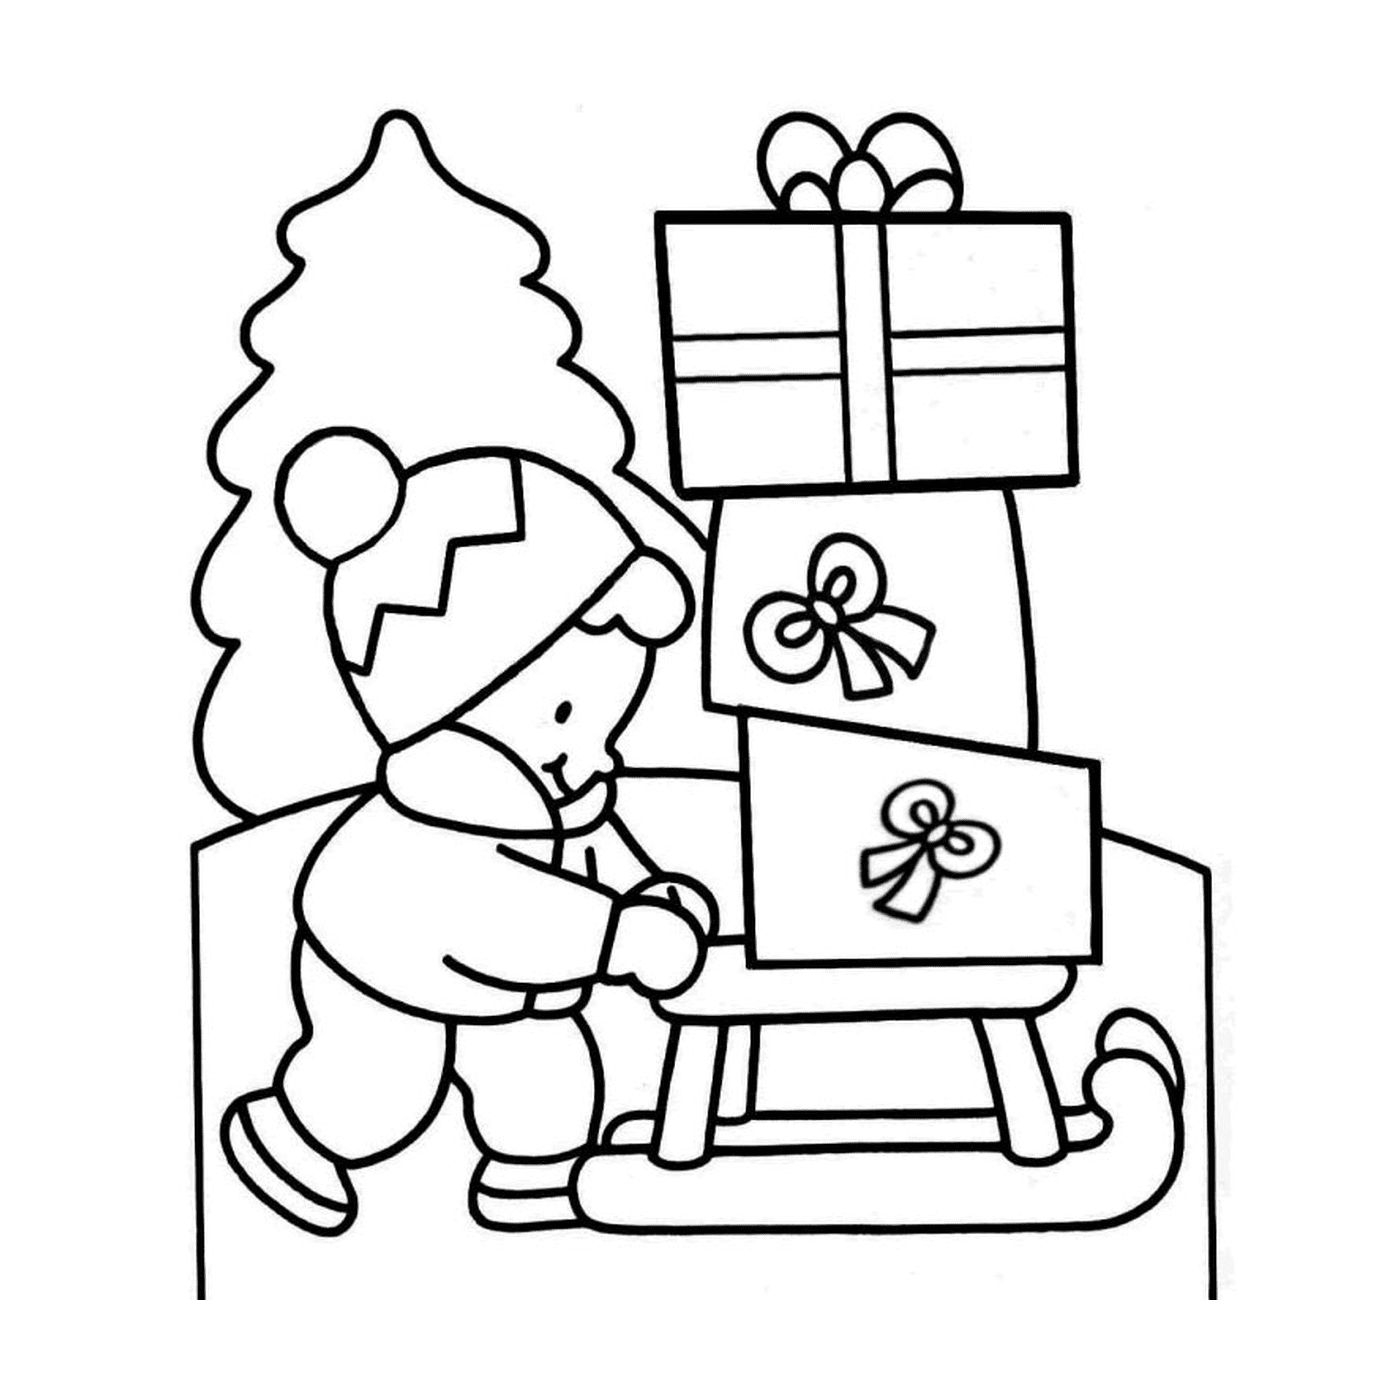  A person next to gifts 